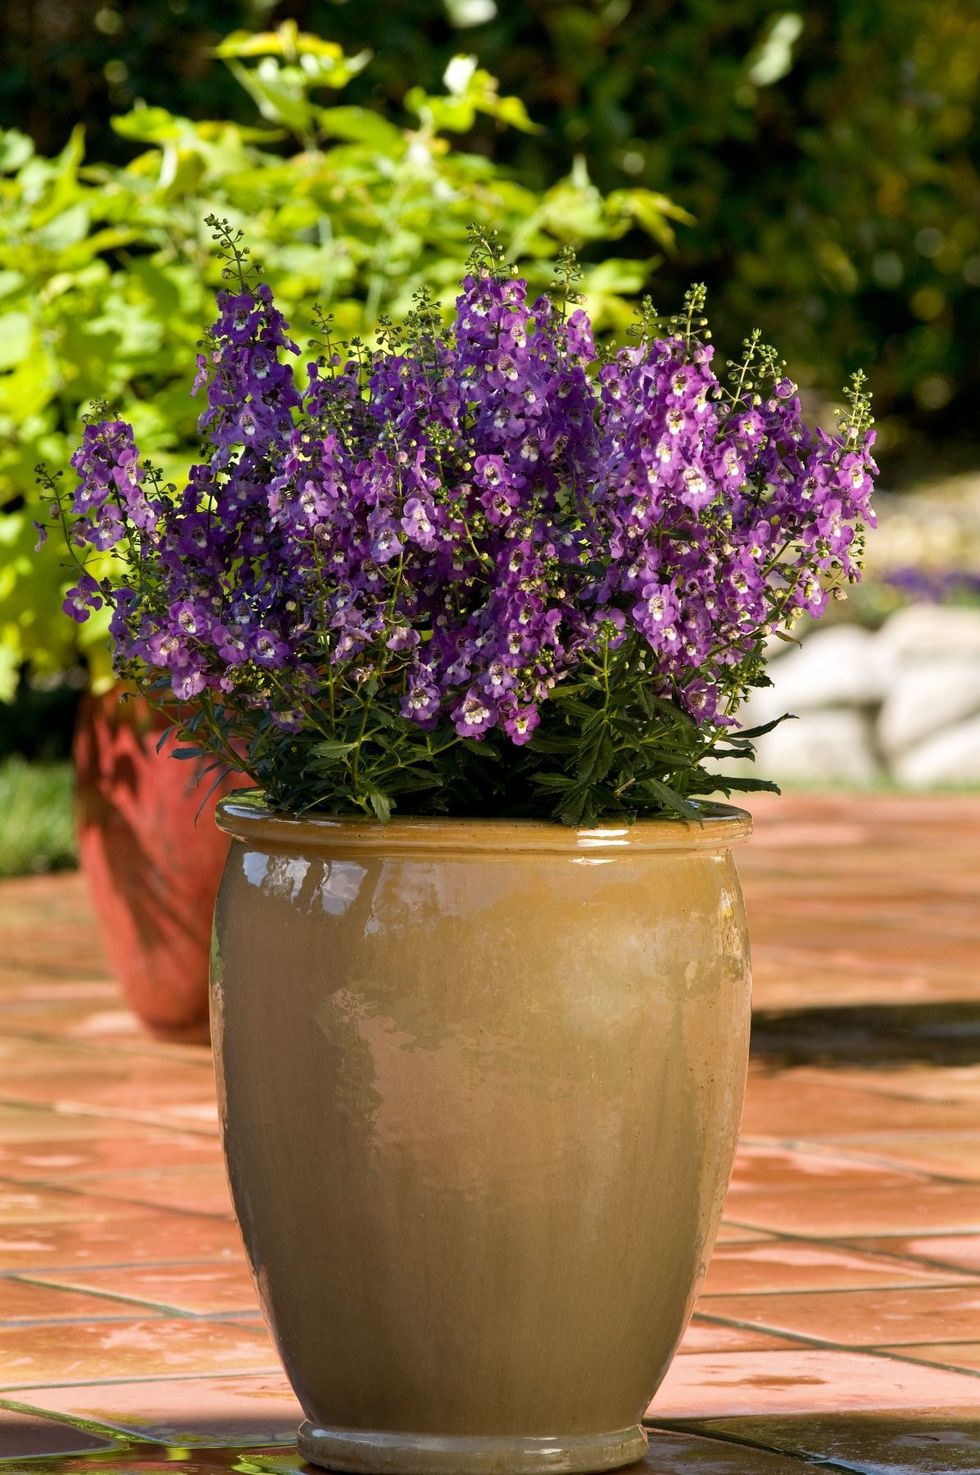 20 Container Gardening Ideas - Best Plants for Containers